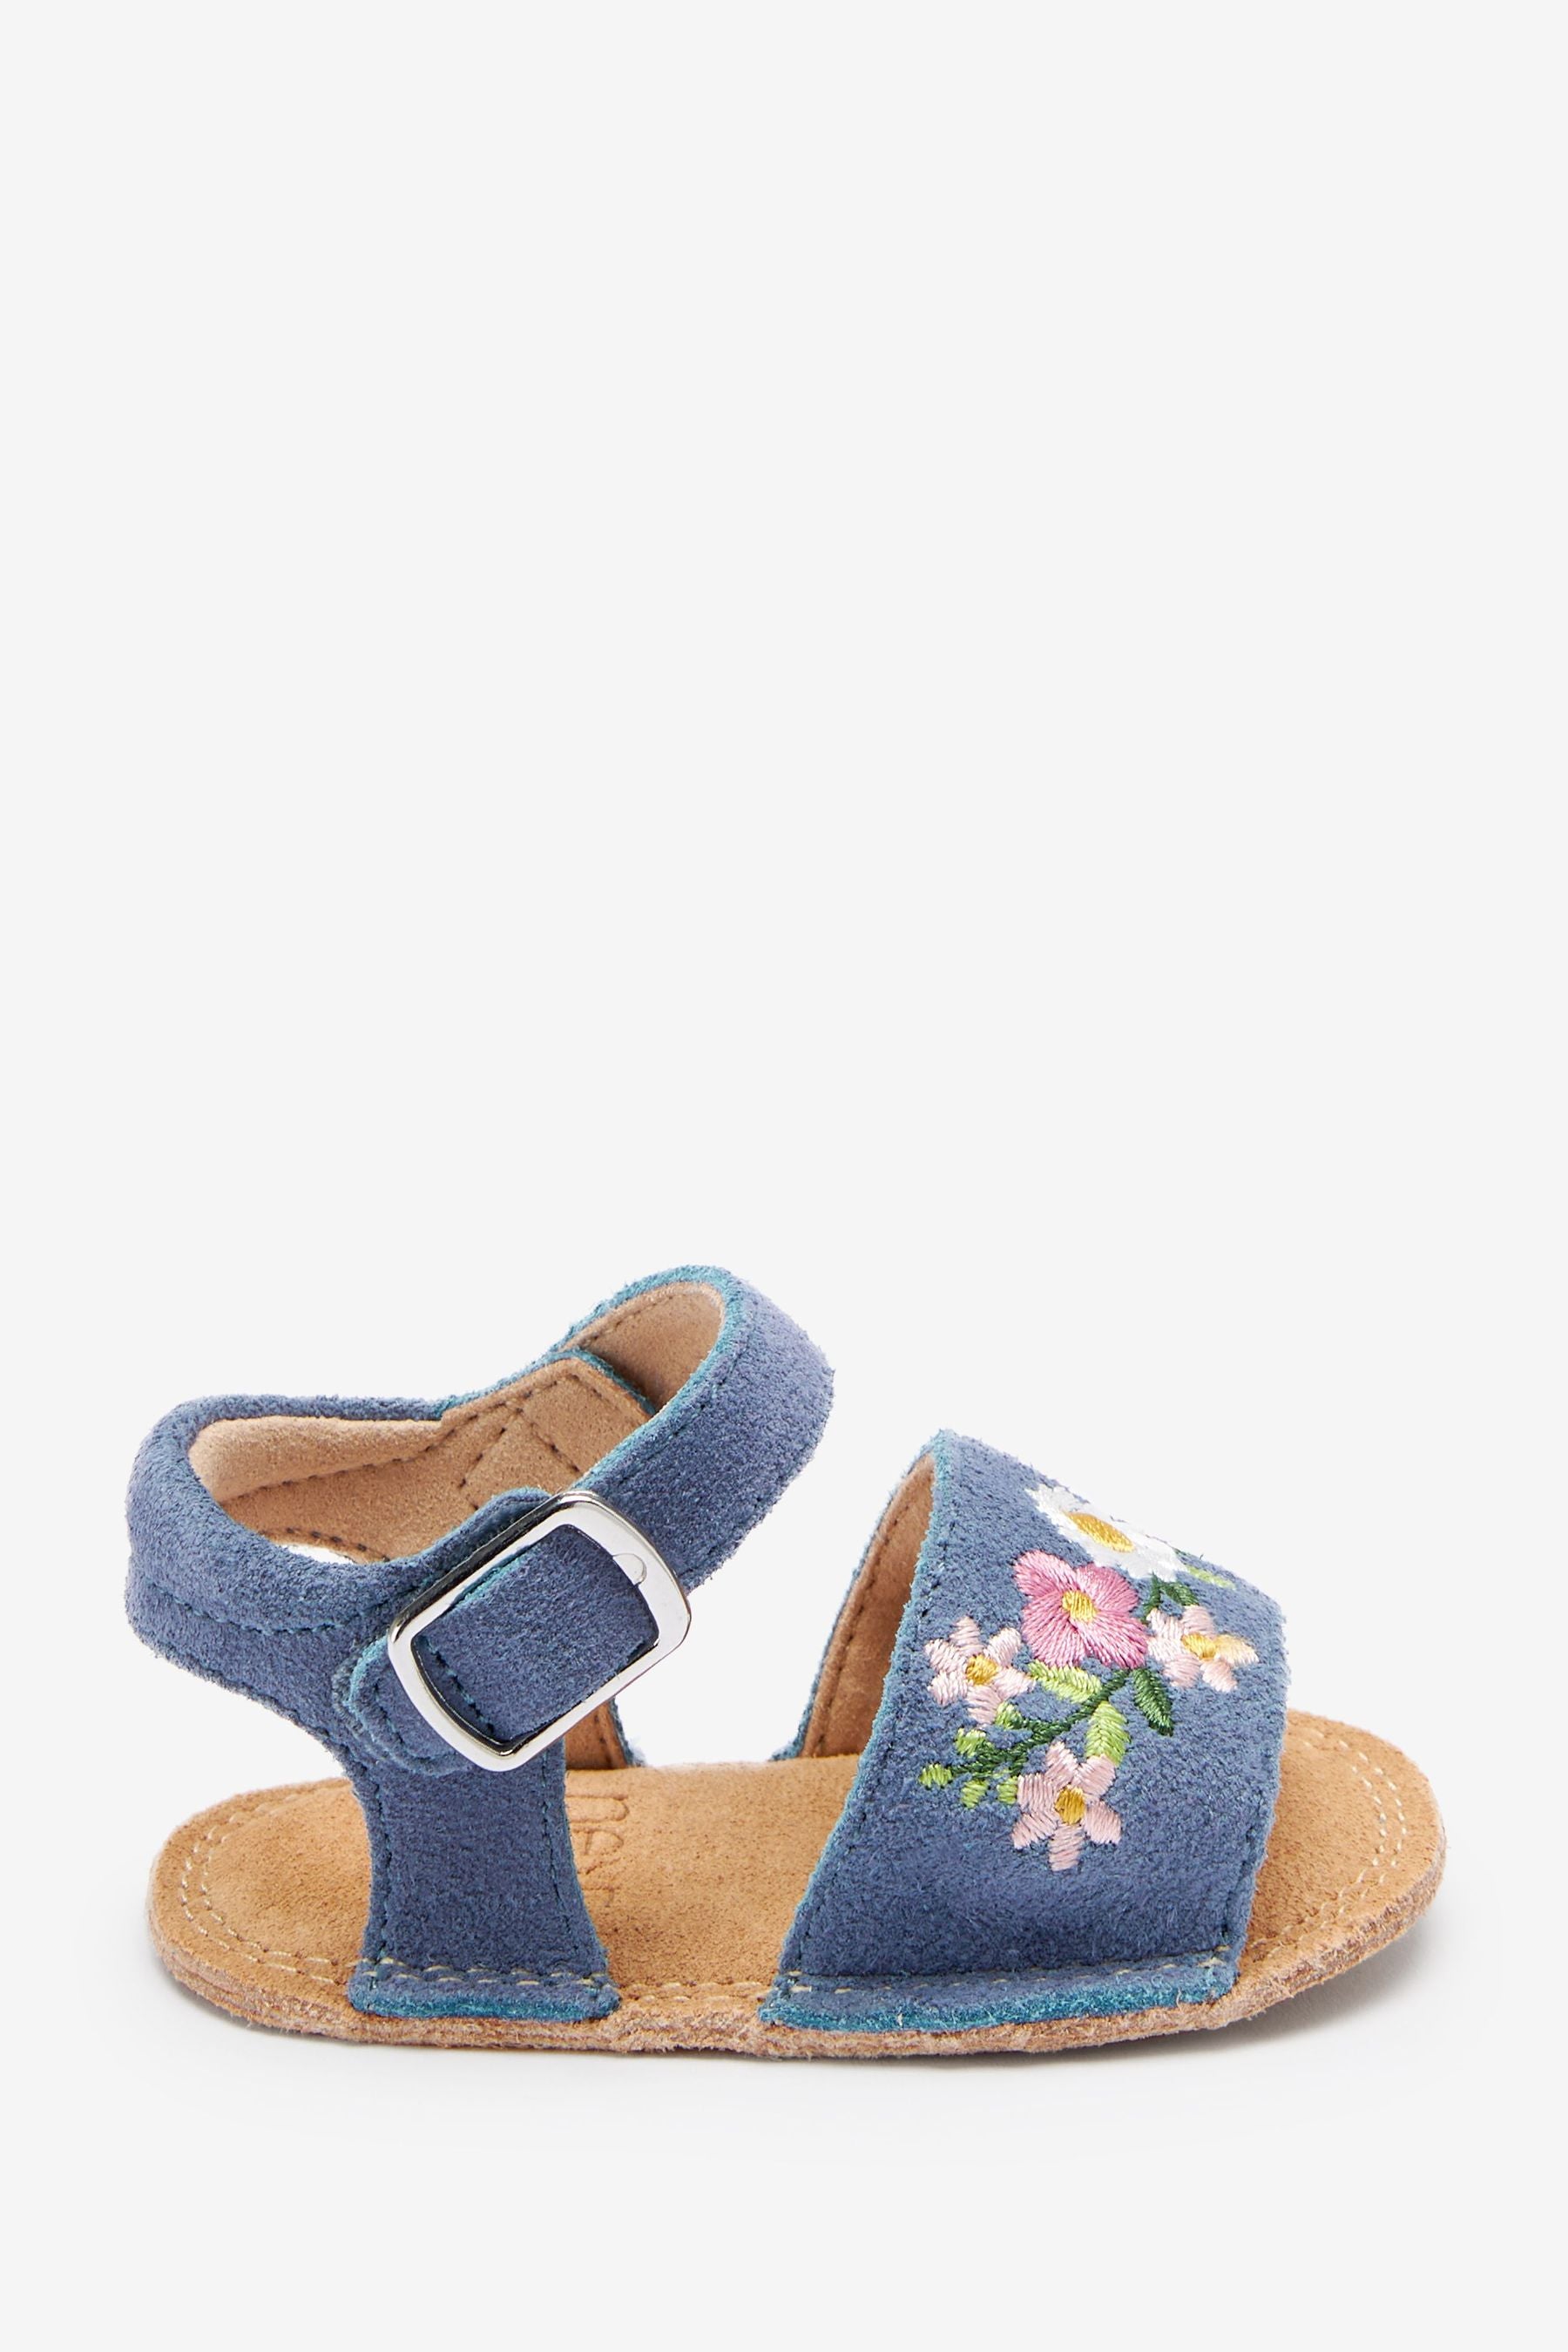 Blue Floral Leather Baby Sandals (0-18mths)